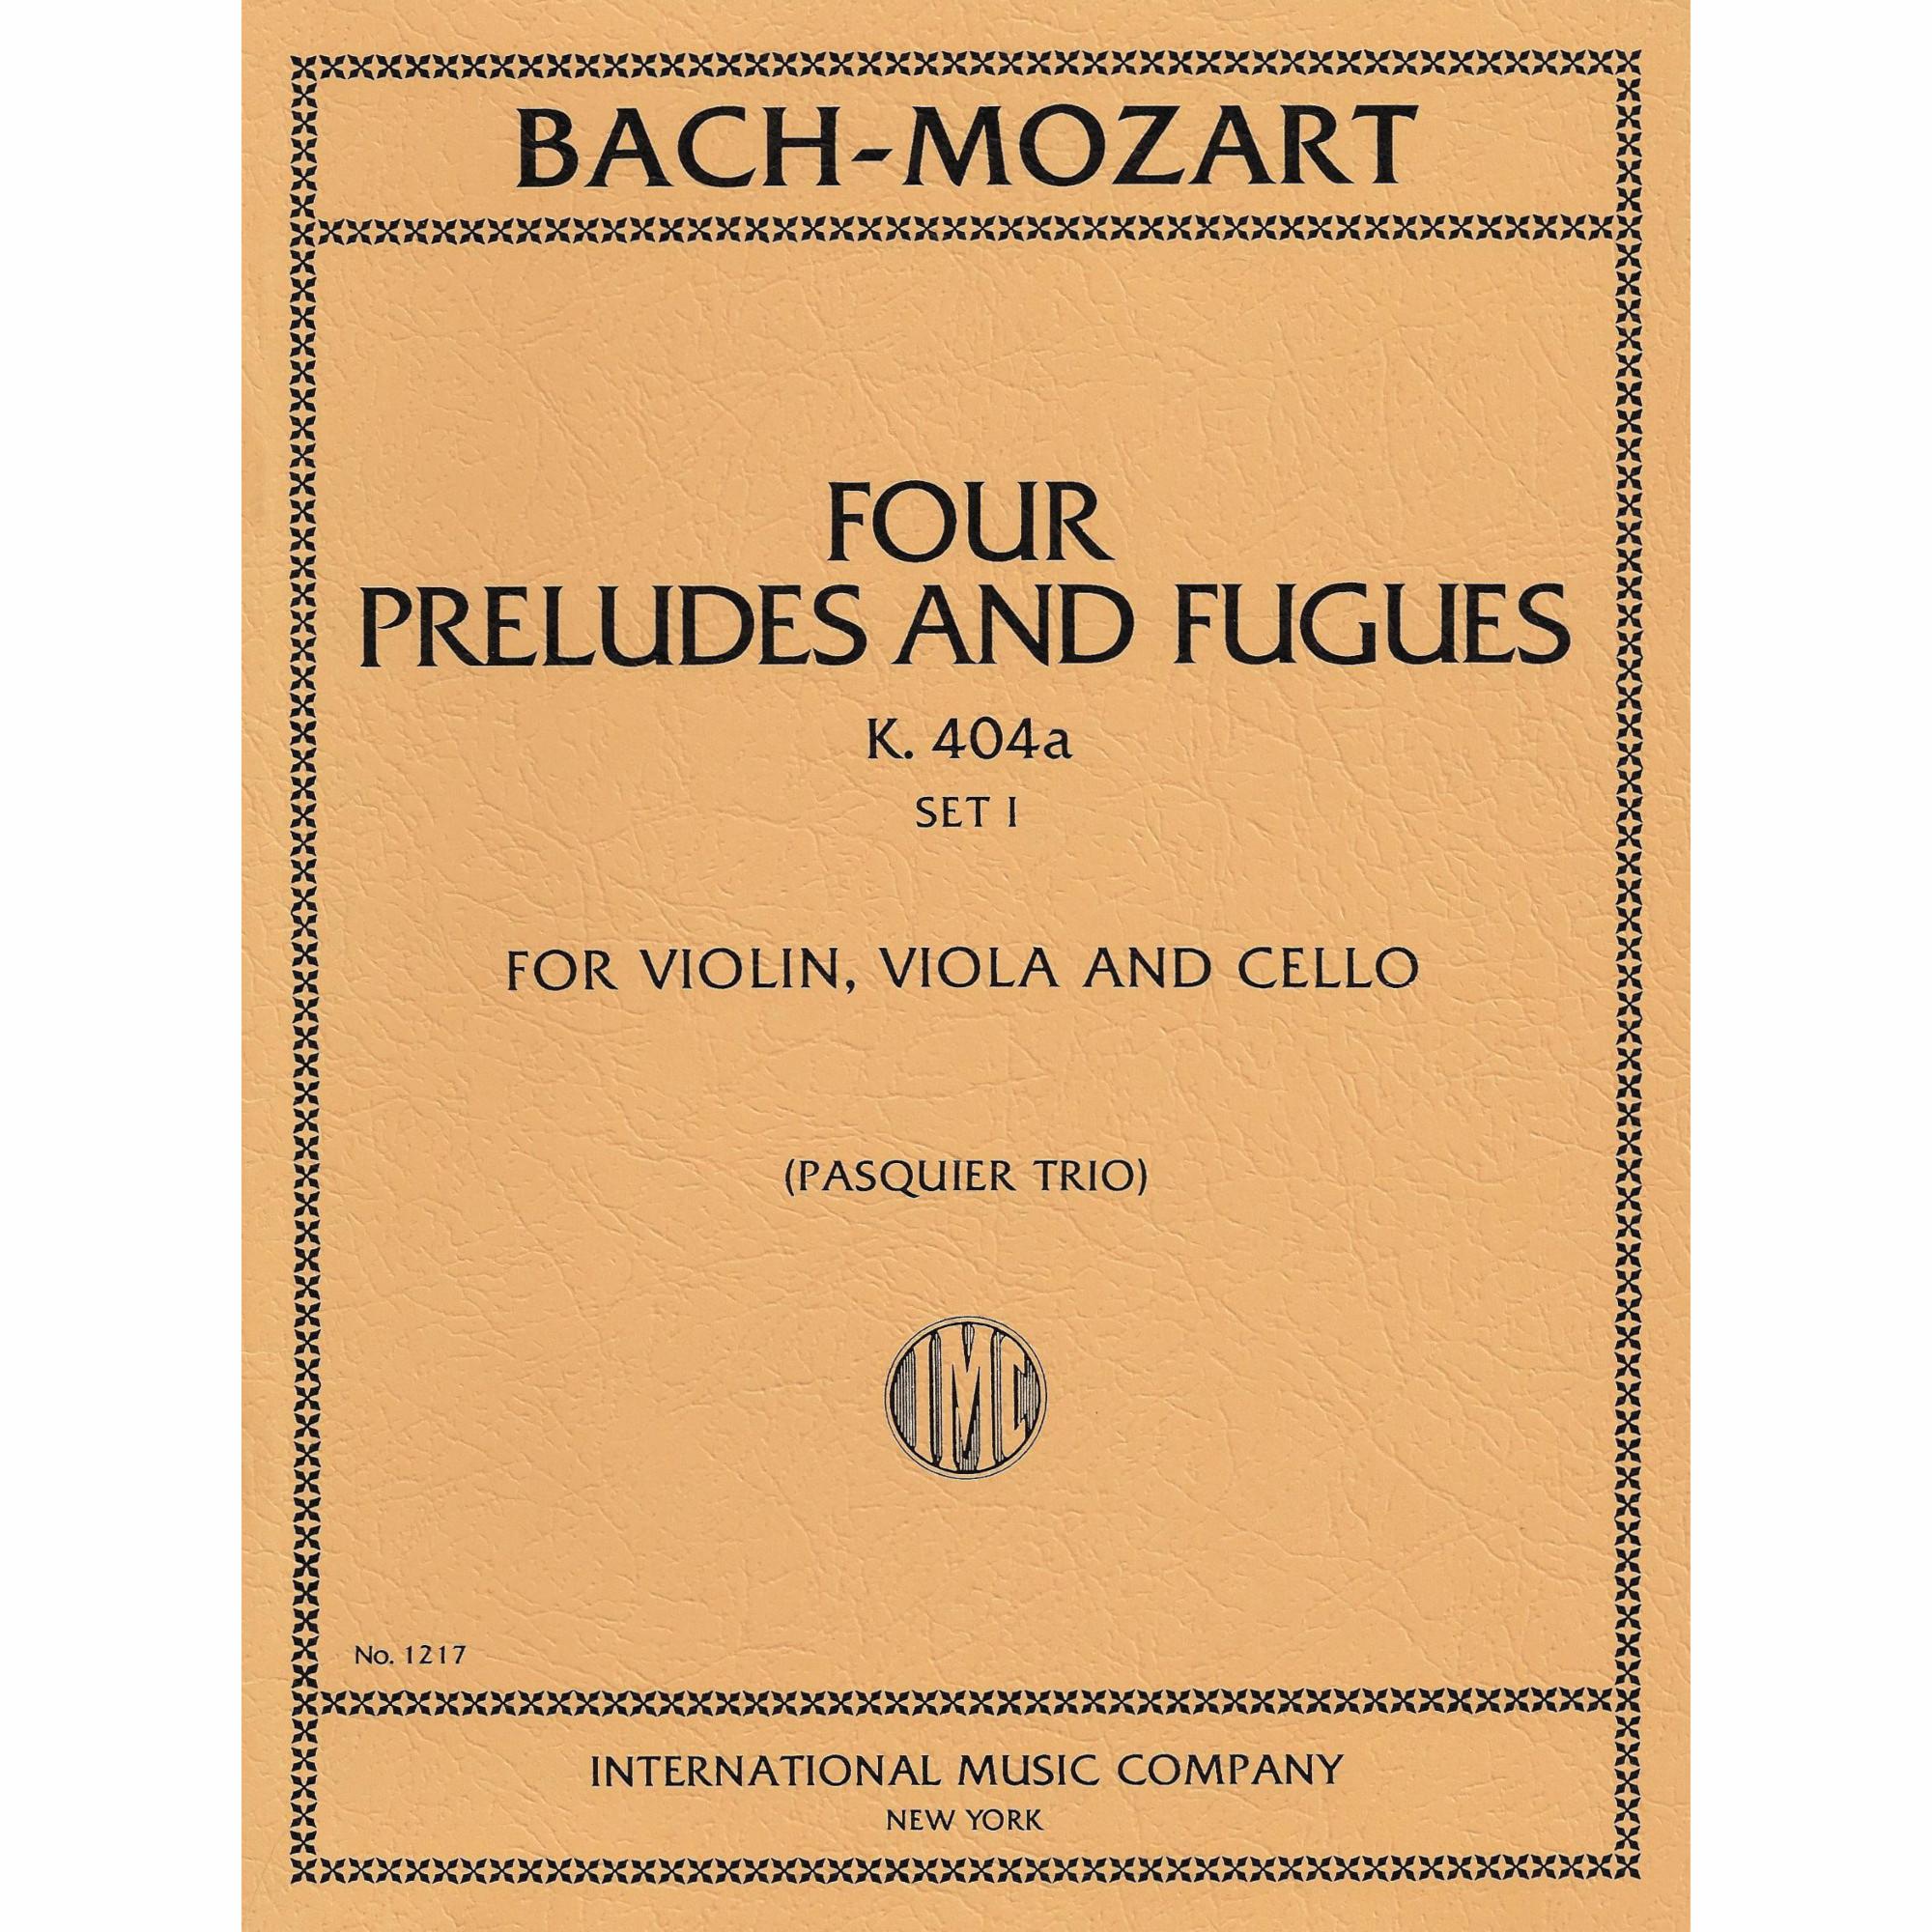 Bach-Mozart -- Preludes and Fugues, K. 404a, Sets I-II for Violin, Viola, and Cello